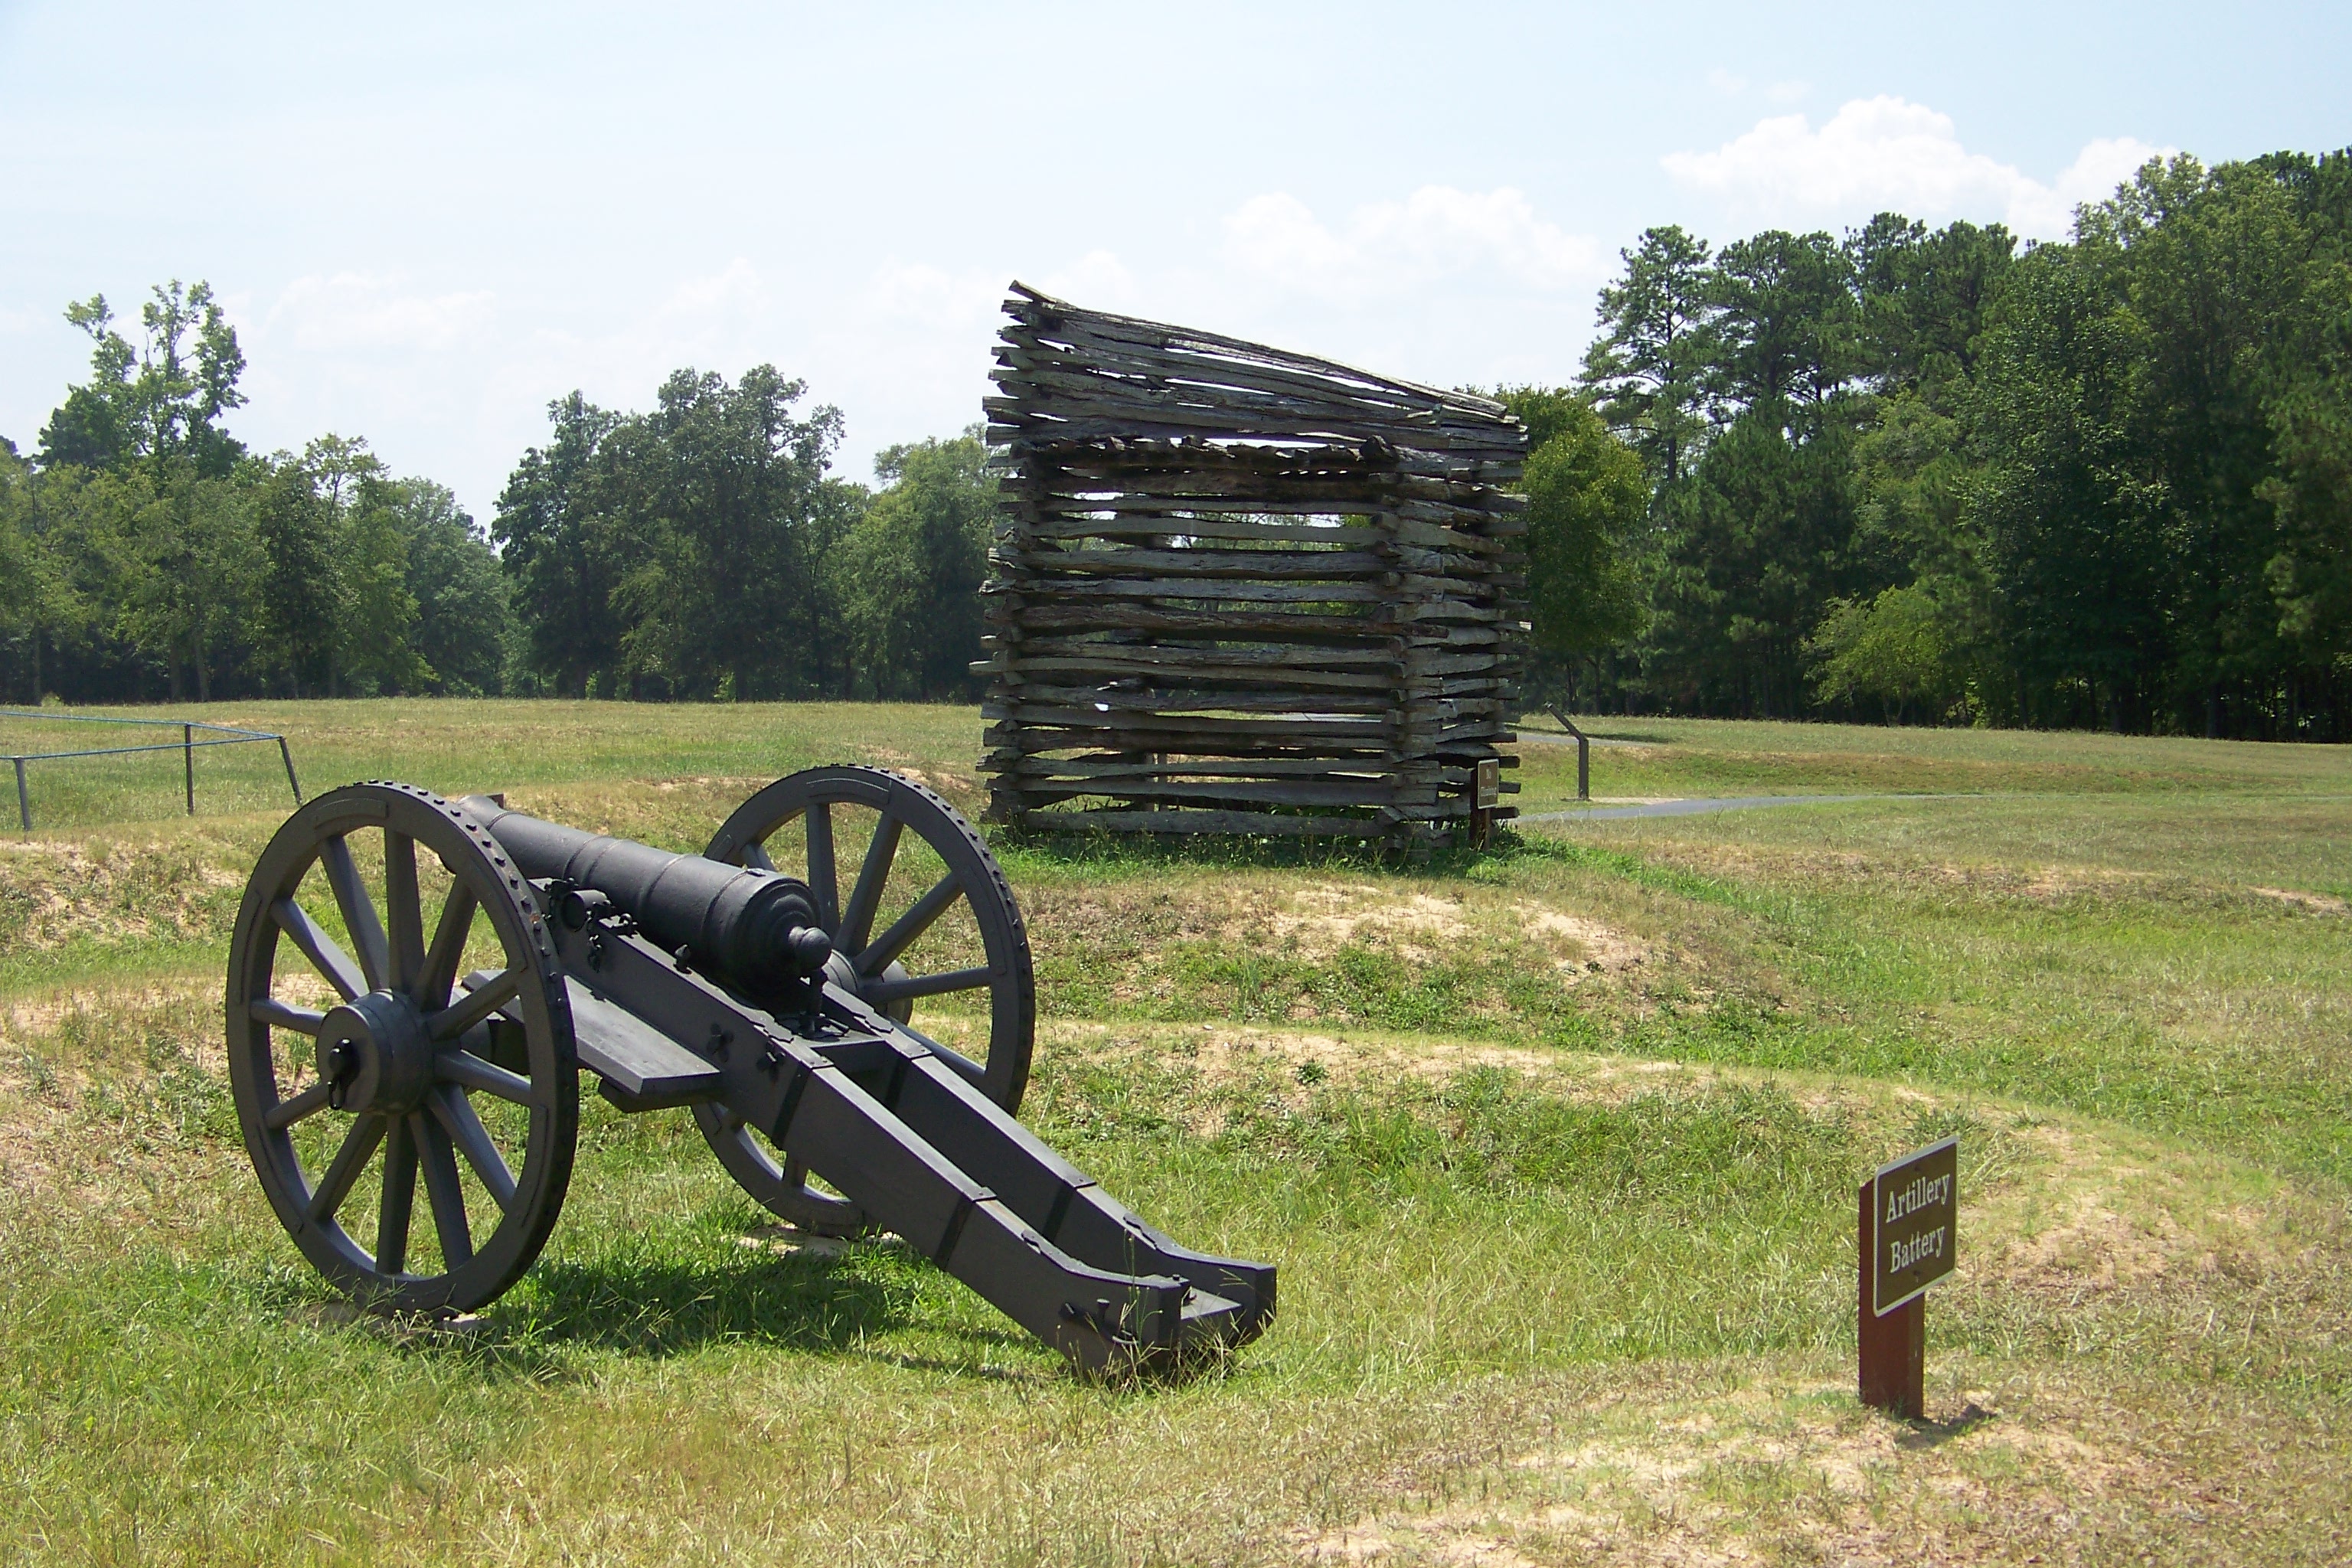 A cannon is in the left foreground with the Maham rifle tower in the distance.